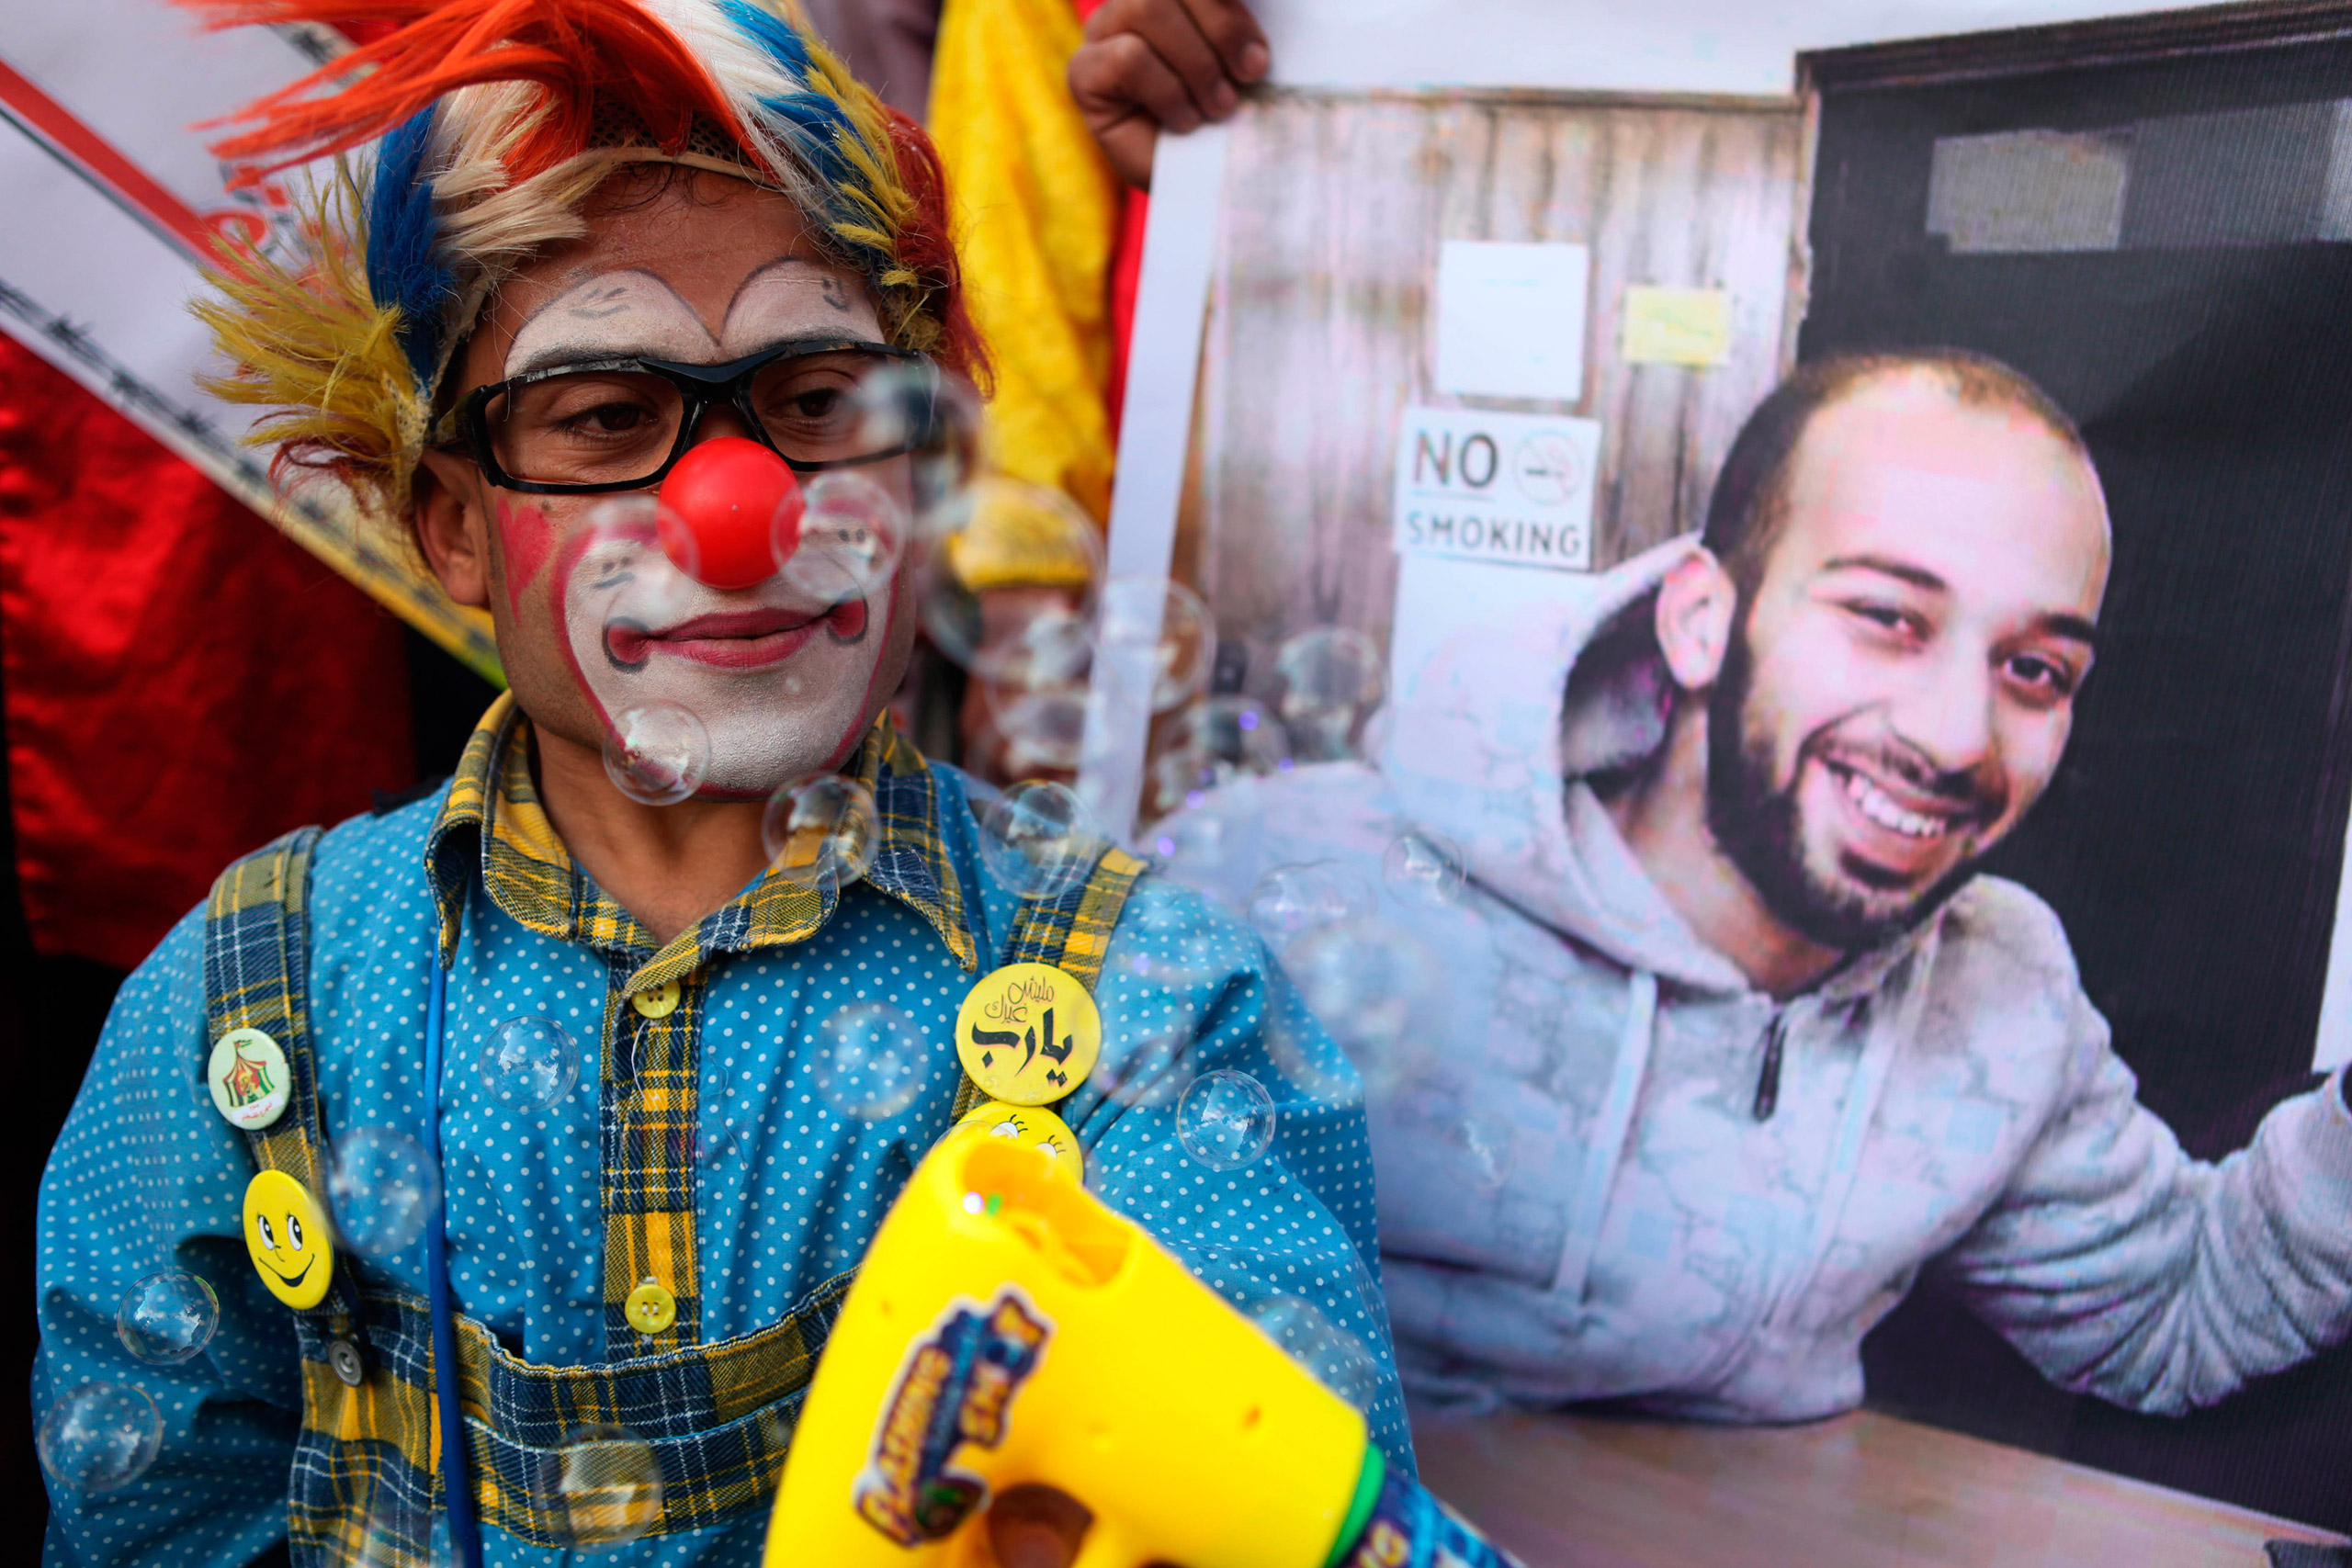 Gaza: Clowns during the show solidarity with their colleague Mohammed Abu Sakha inside an Israeli jail